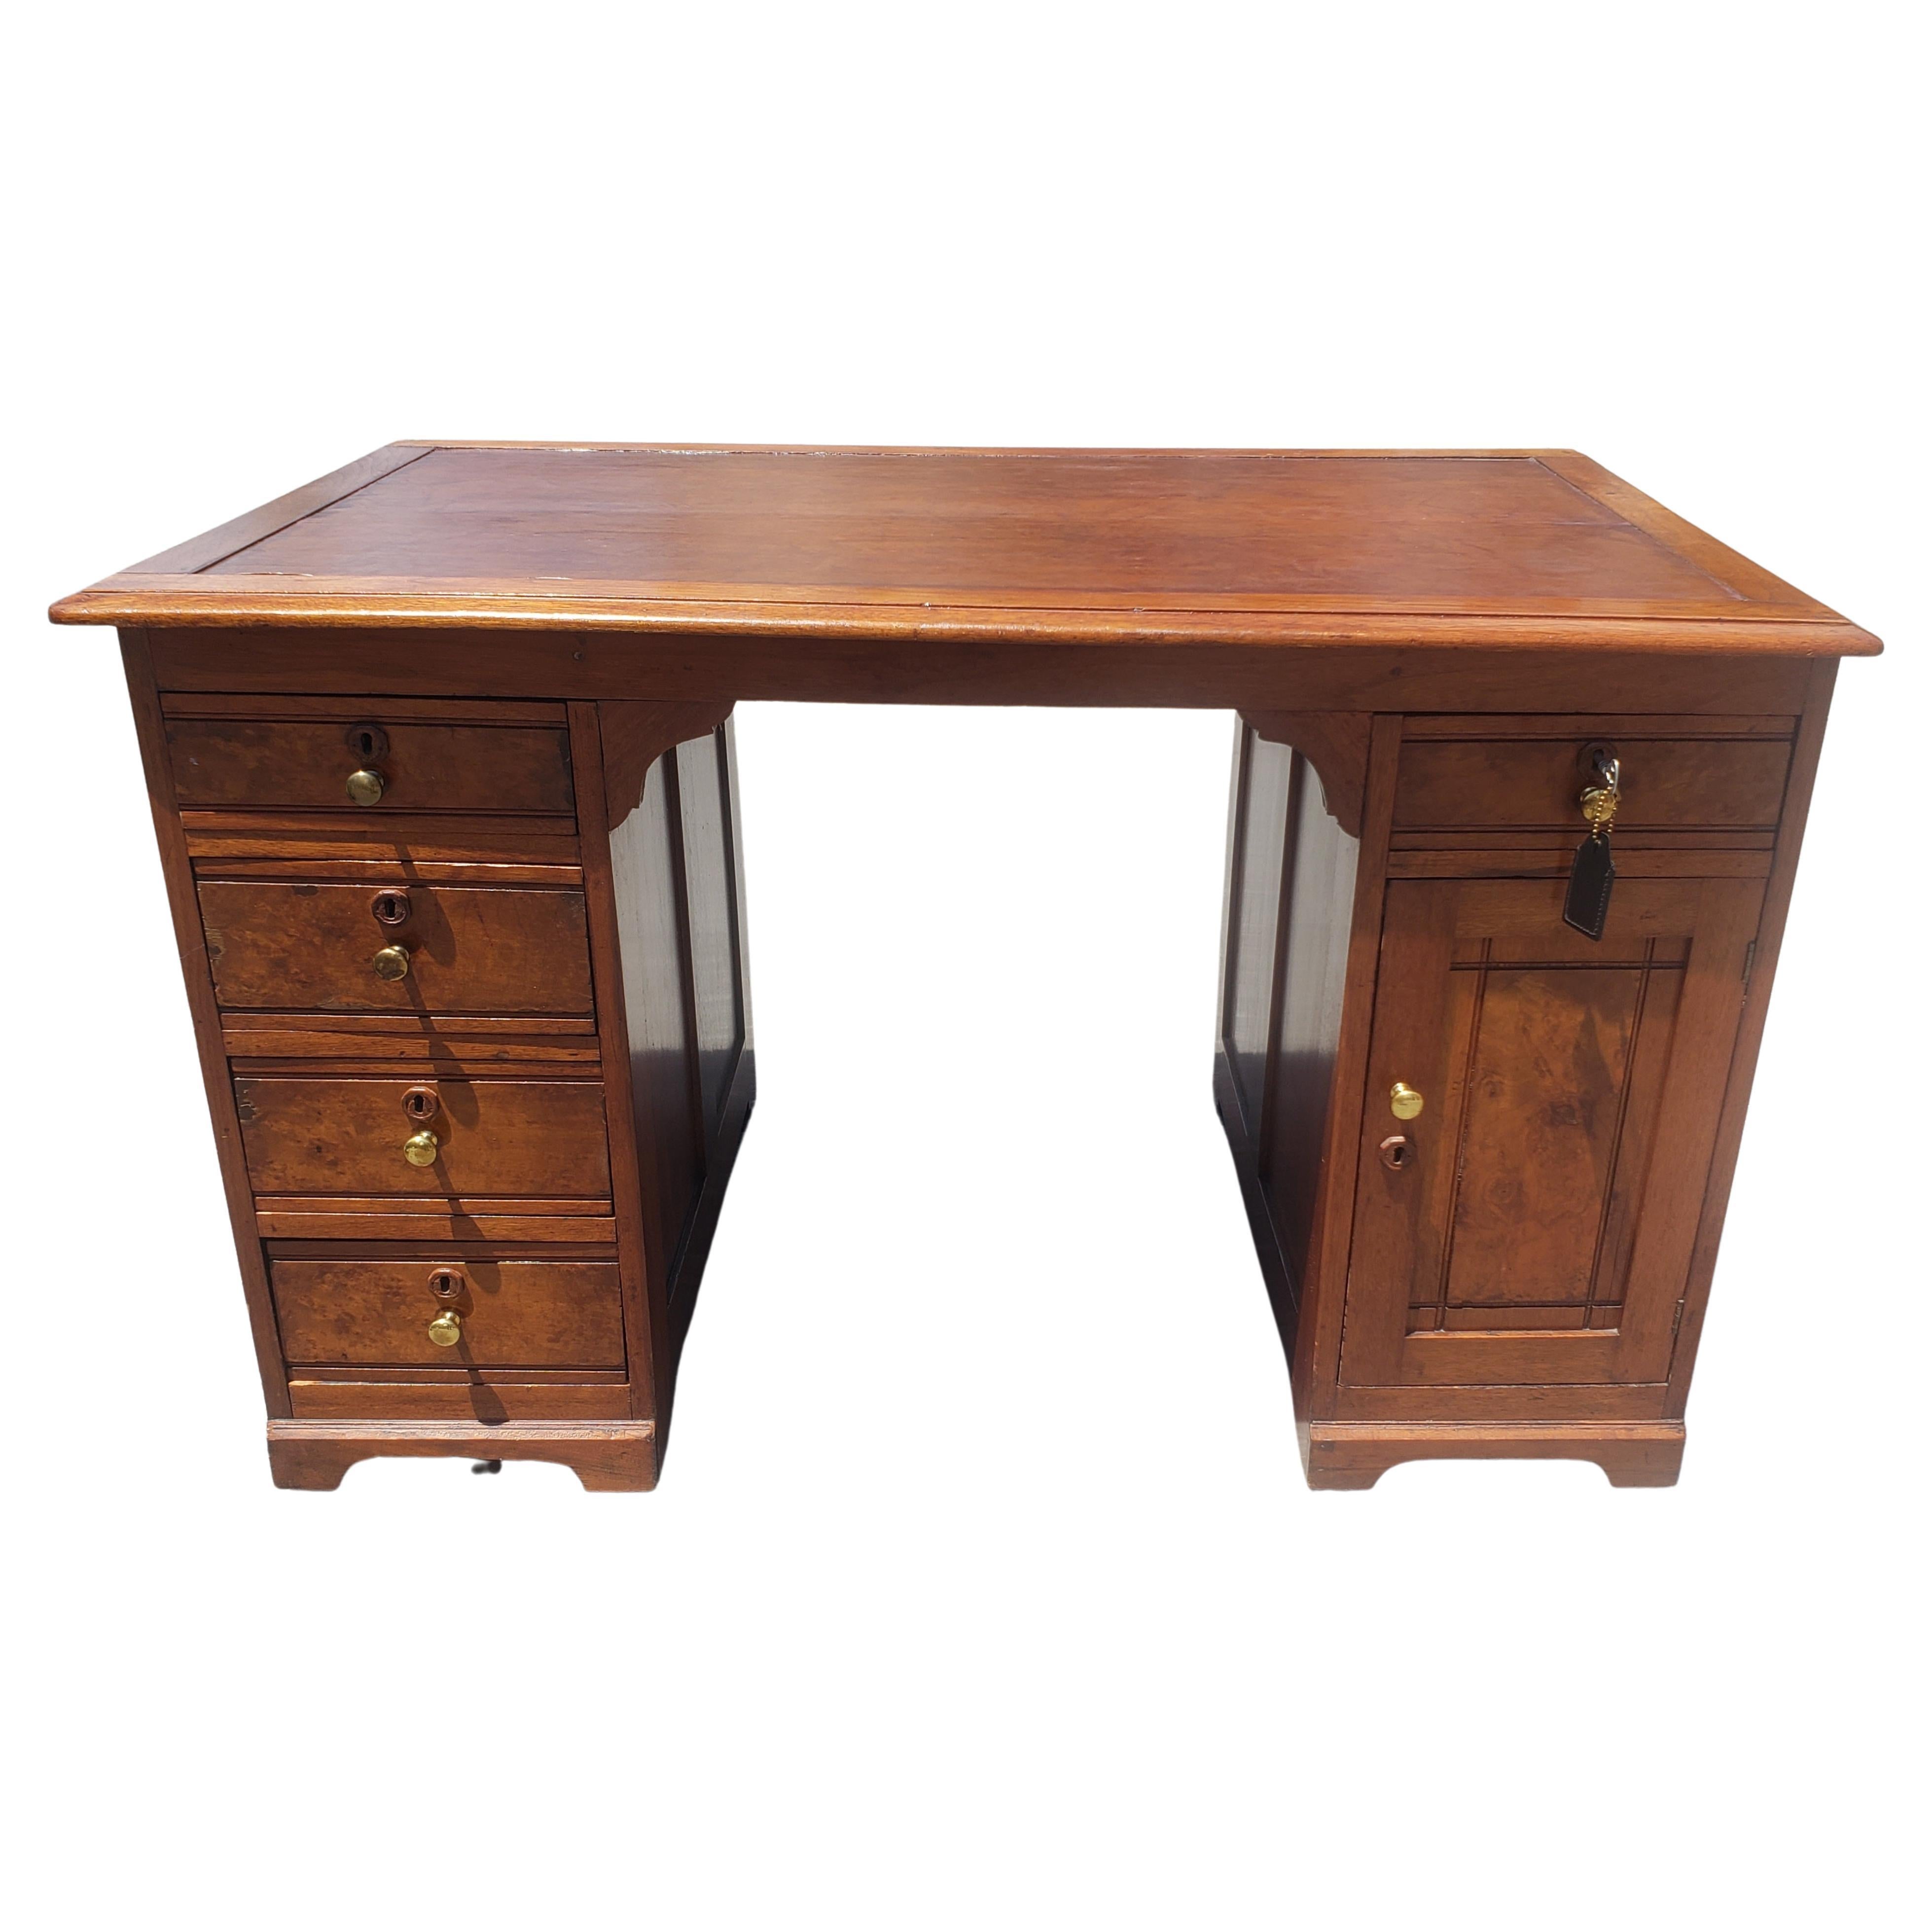 A Late 19th Century Refinished Regency Style Walnut and Maple, tooled leather top Partners Desk that has been recenlty hand-rub refinished.  All drawers and door with functional lock and key present. Features 5 very deep drawers with the 19th